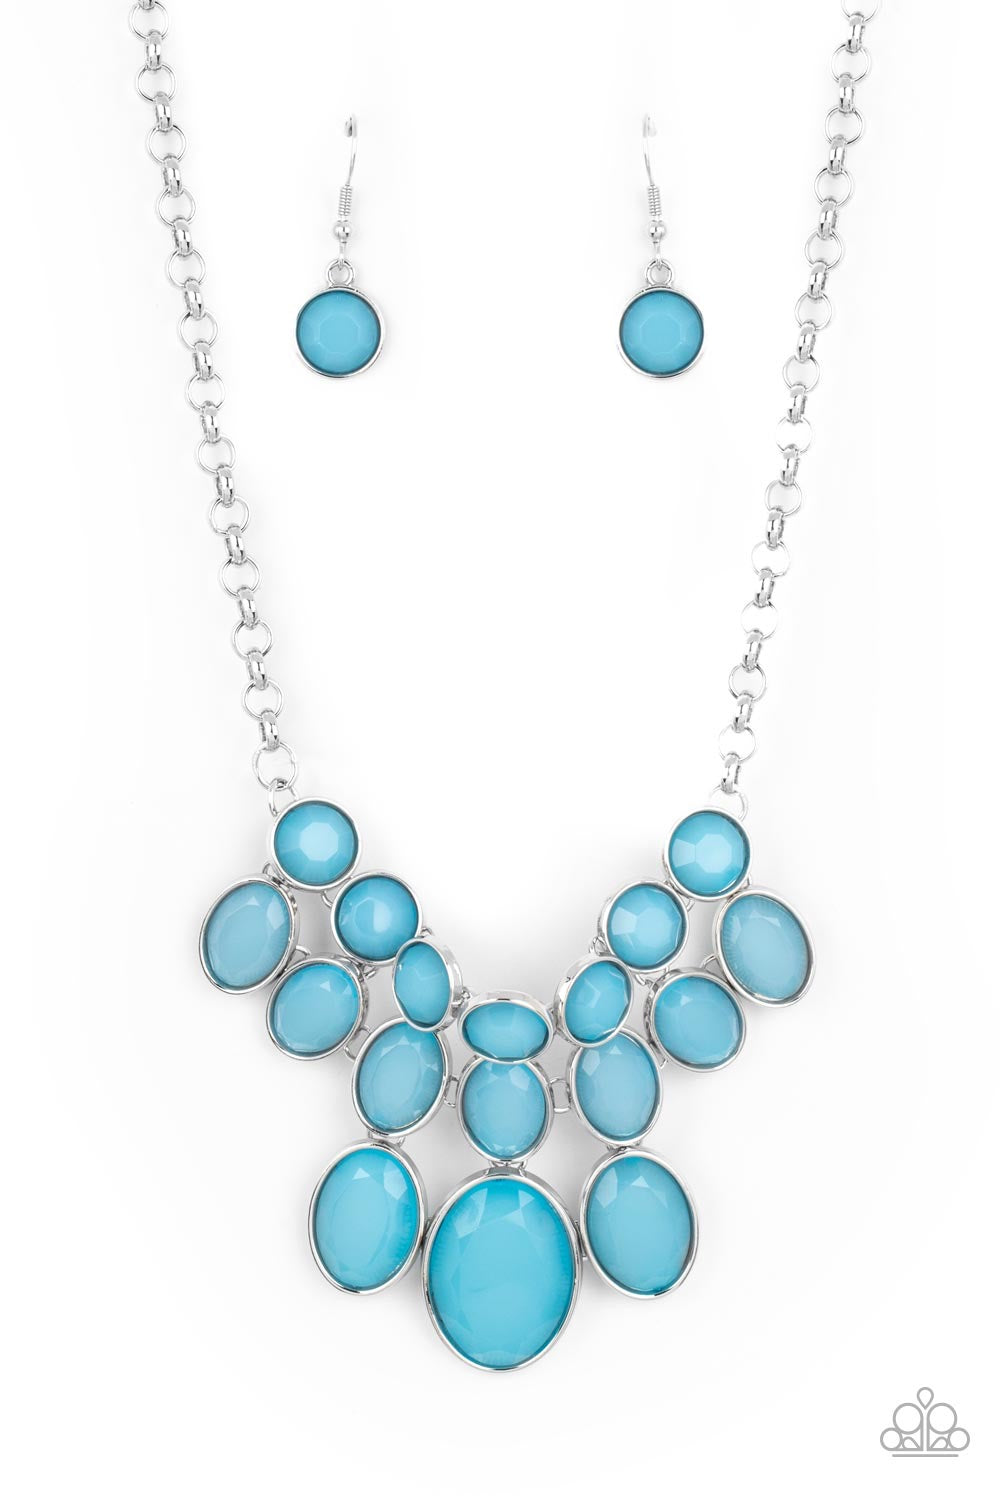 Paparazzi Jewelry Images - Delectable Daydream - Blue Necklace 